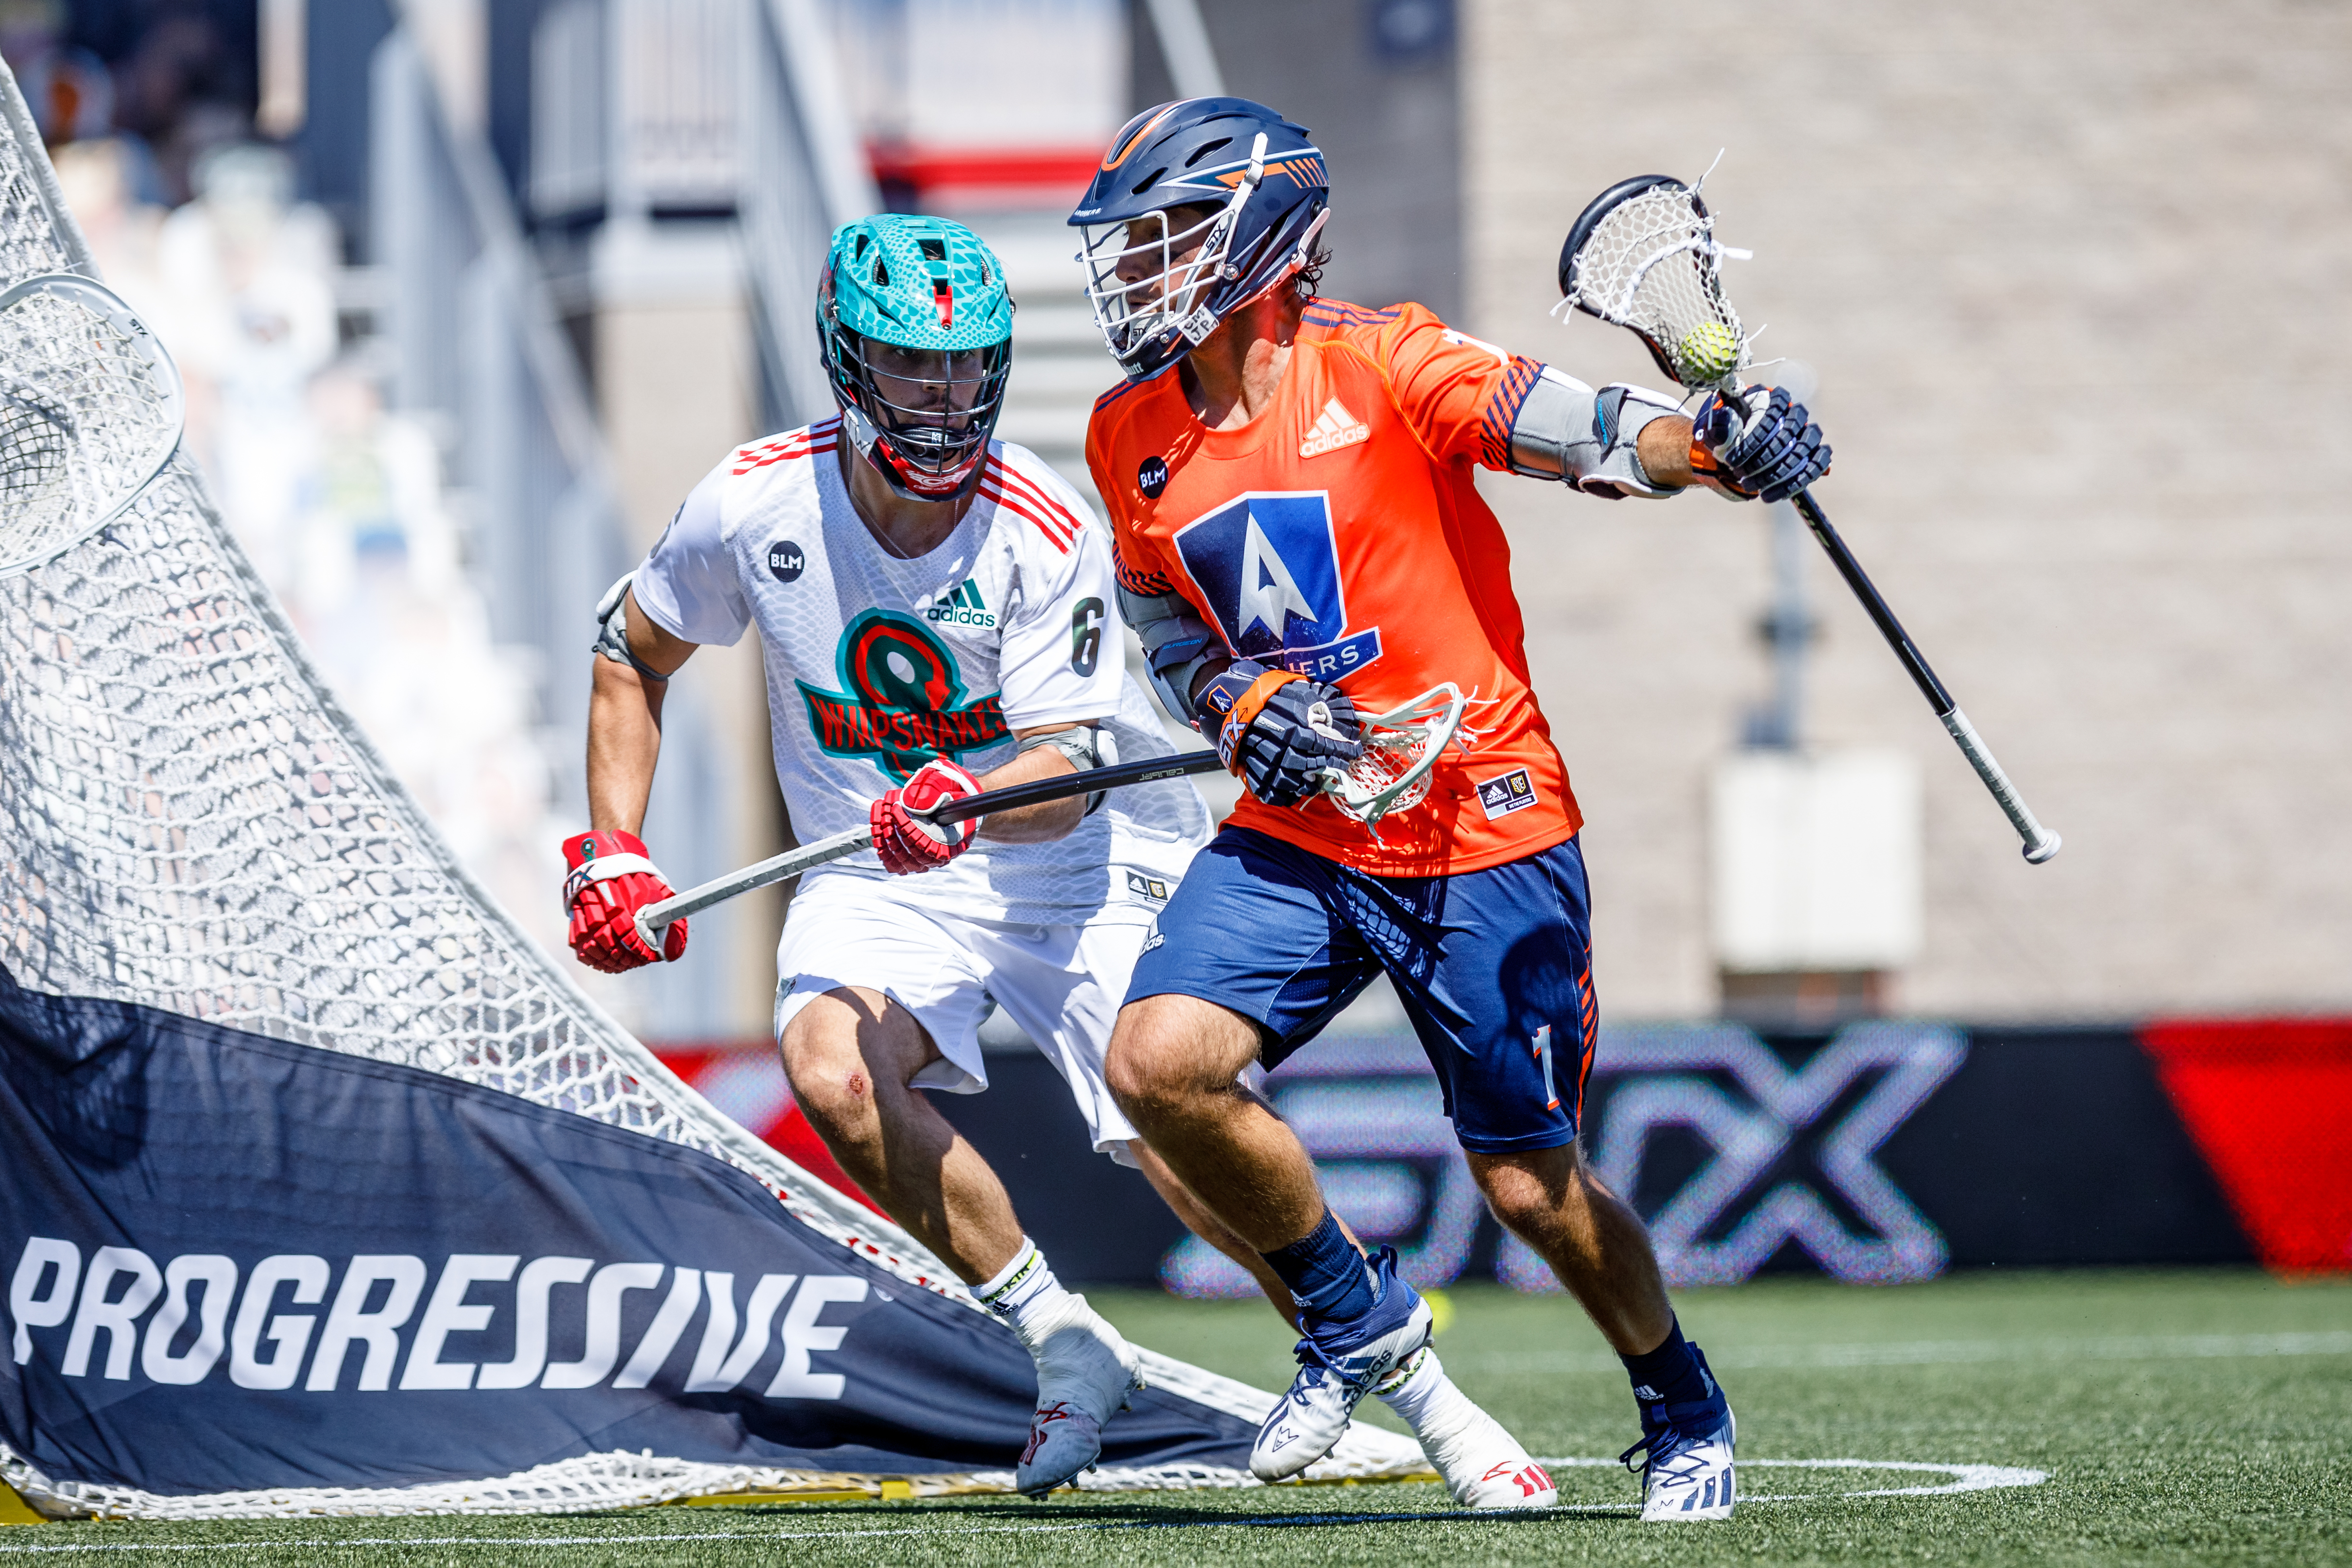 Breaking: PLL and MLL to Merge, Unifying Pro Outdoor Lacrosse